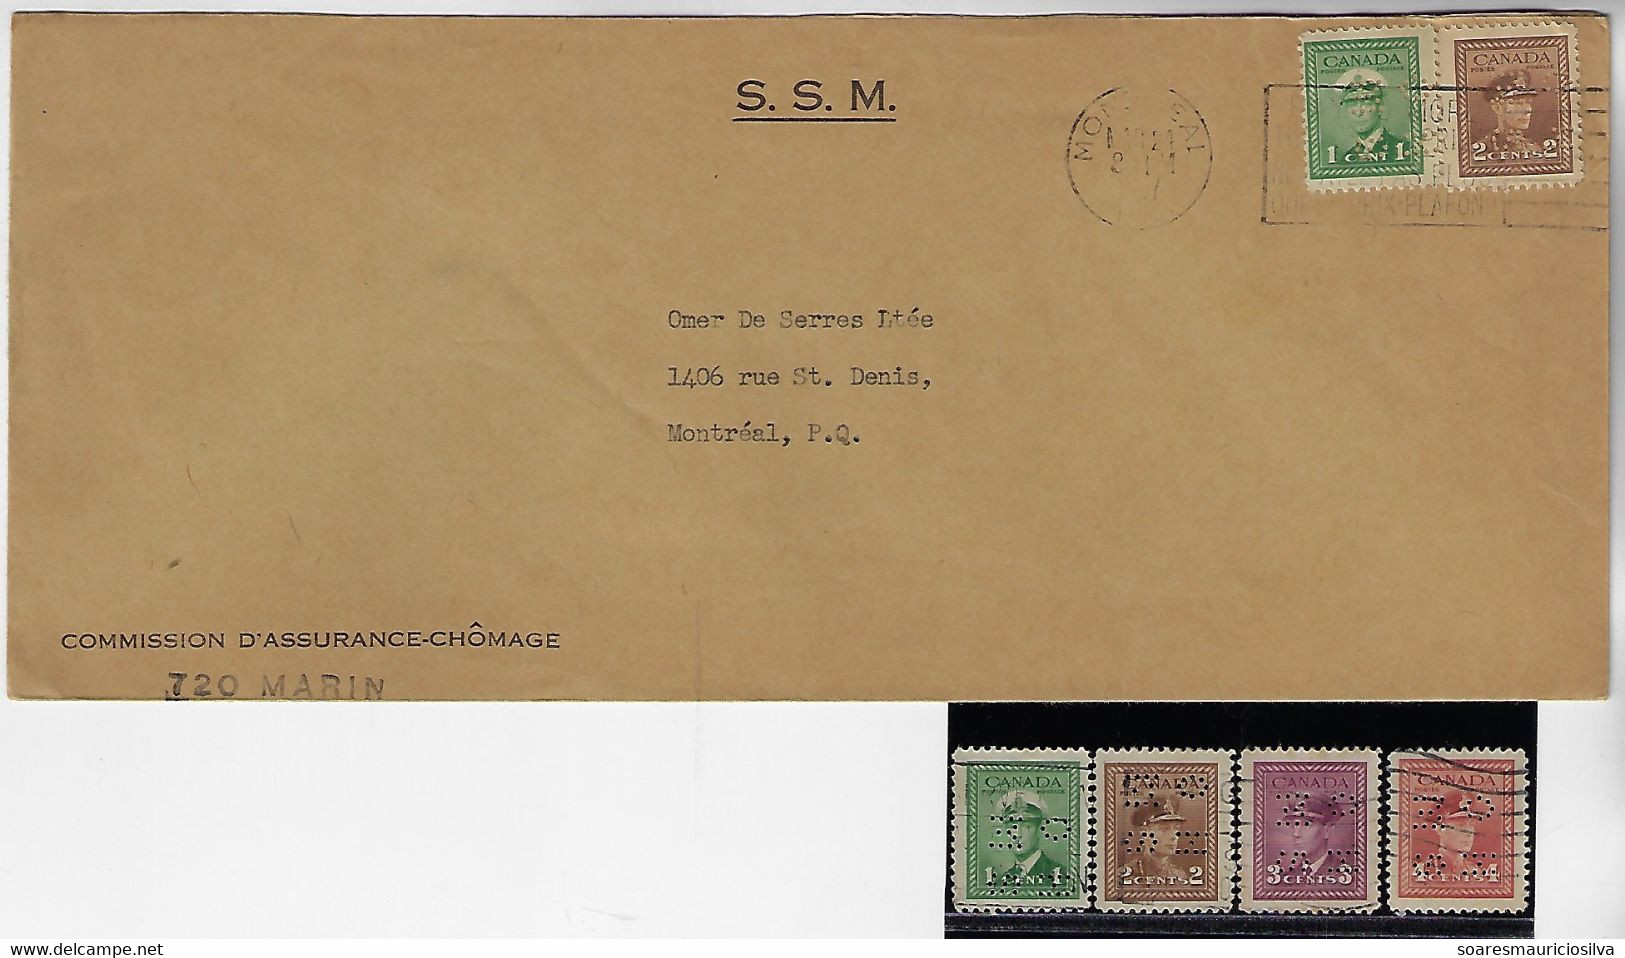 Canada 1947 Cover S.S.M. Unemployment Insurance Commission Perfin OH/MS On Her/His Majesty 's Service + 4 Stamp - Perfins